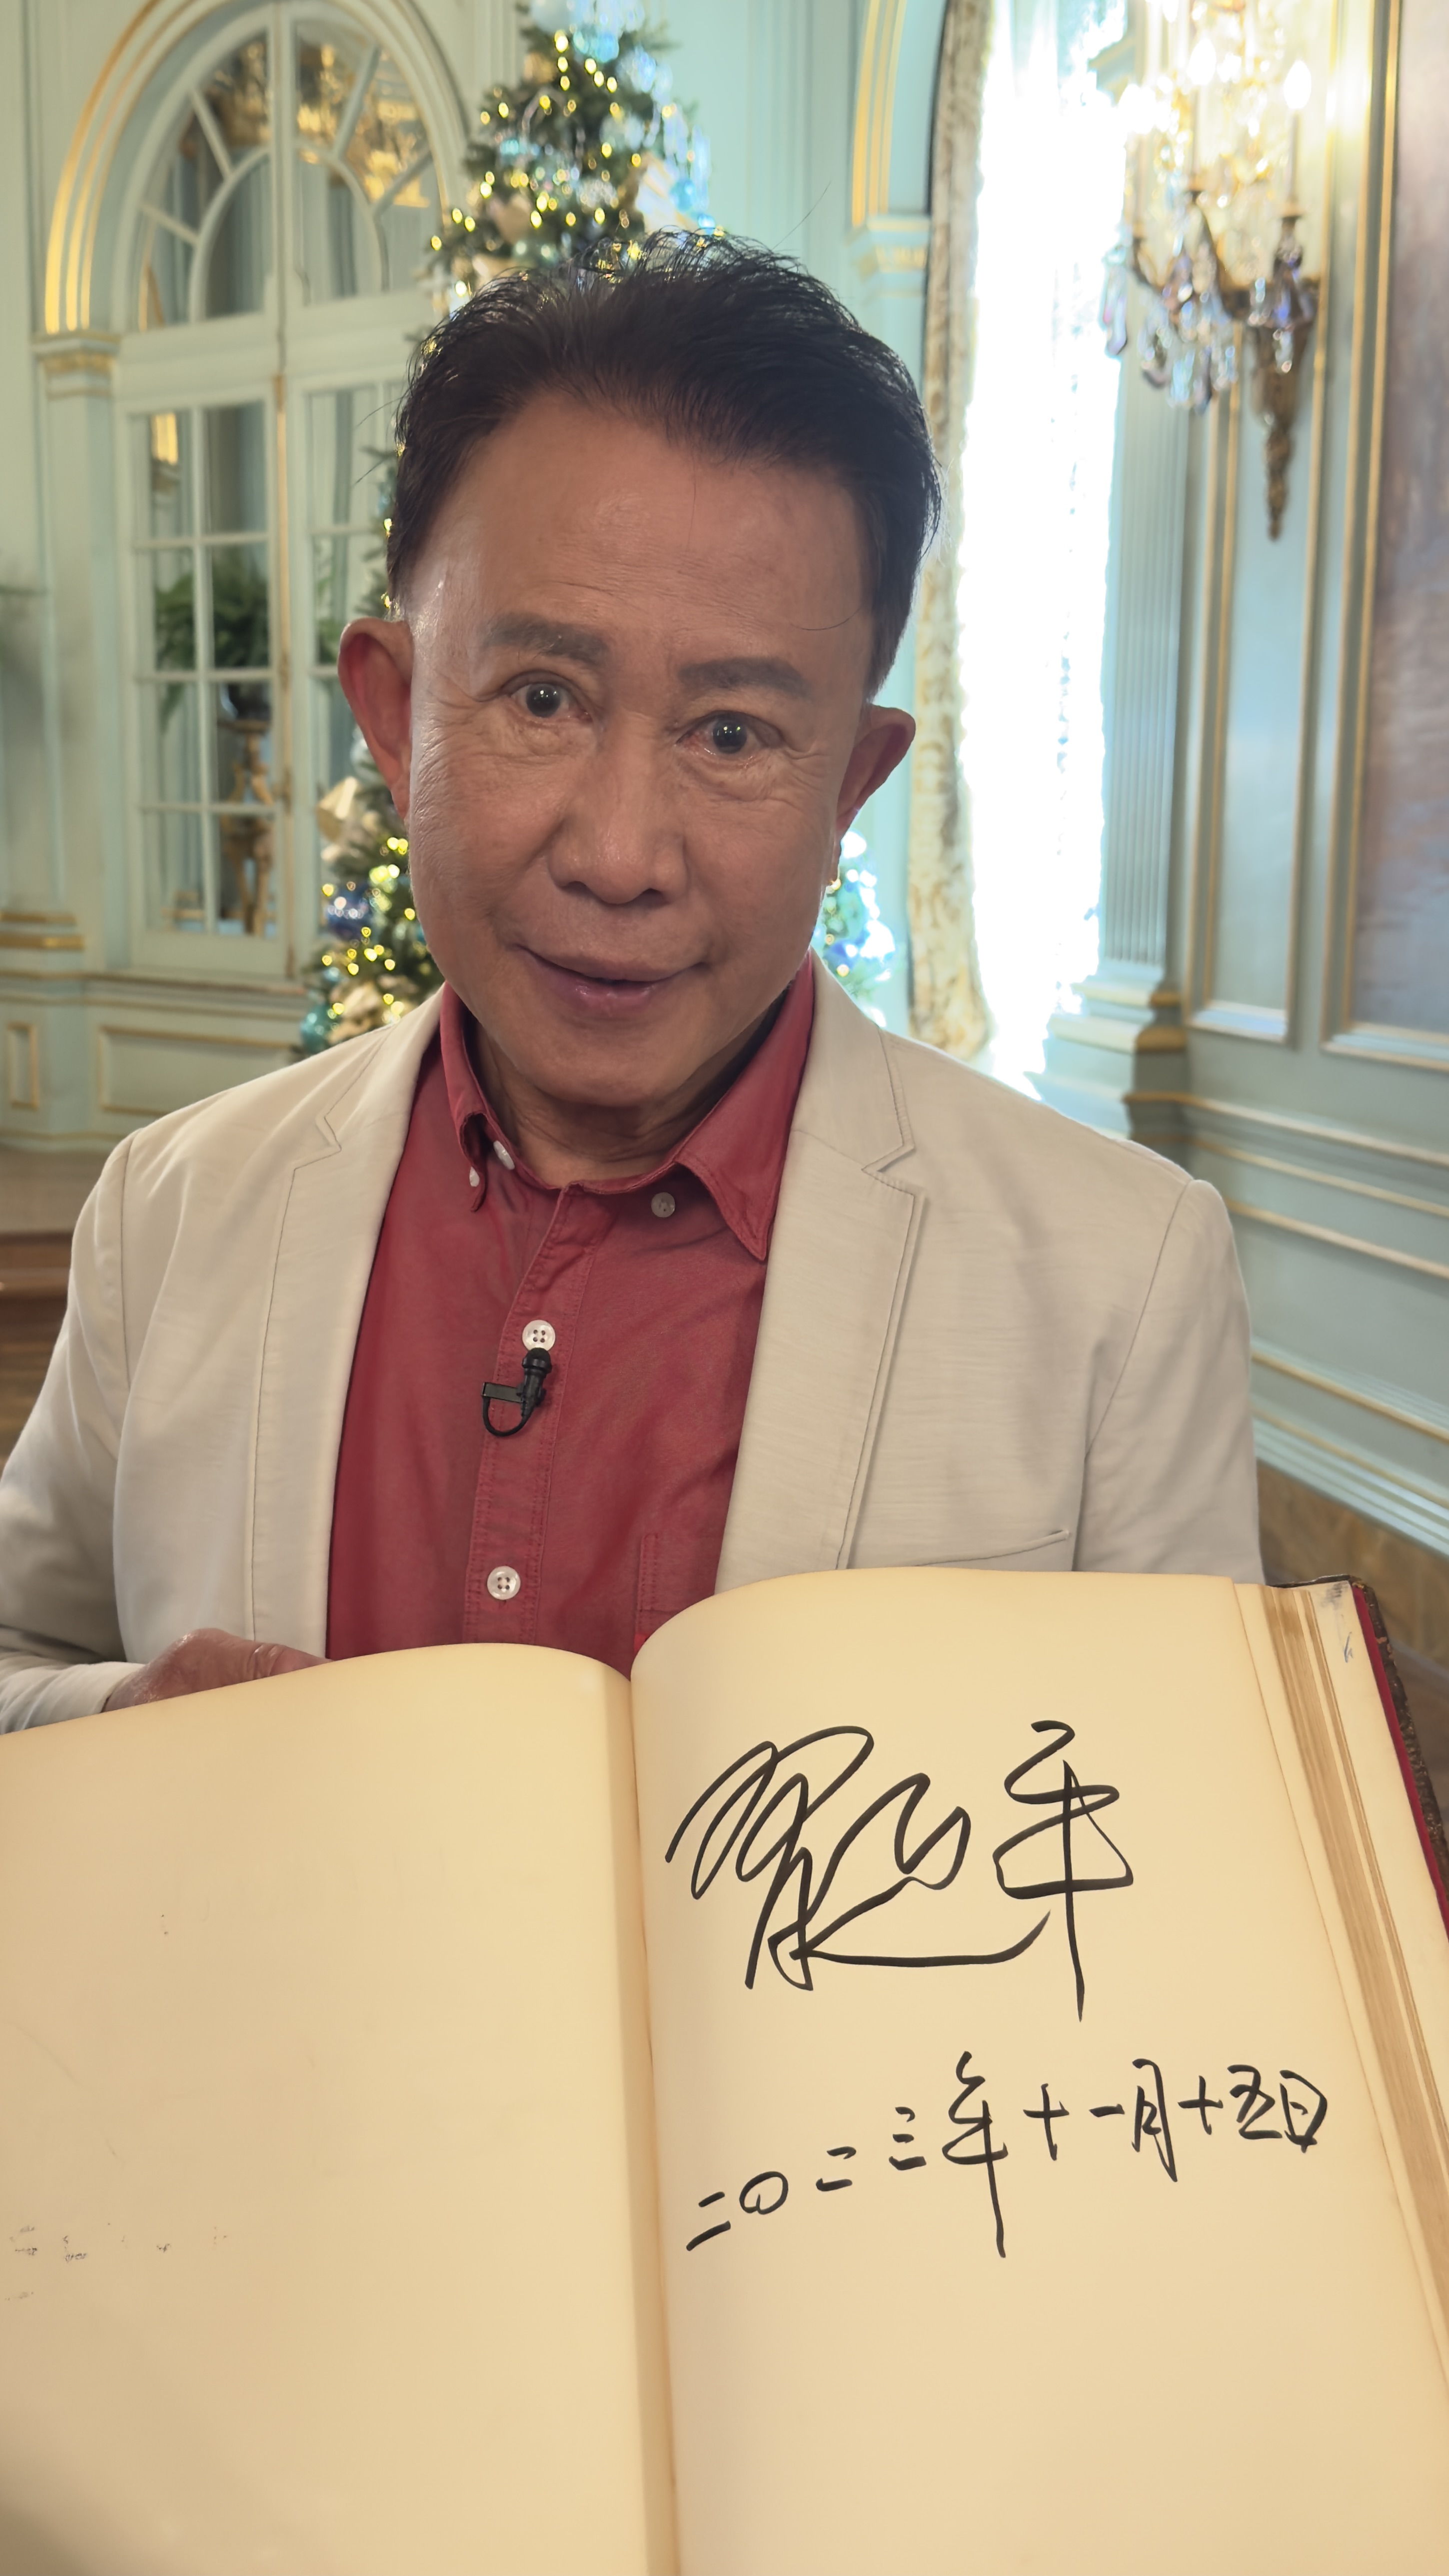 Celebrity chef Martin Yan poses for a photo with Chinese President Xi Jinping's signature on Fioli's guest book.